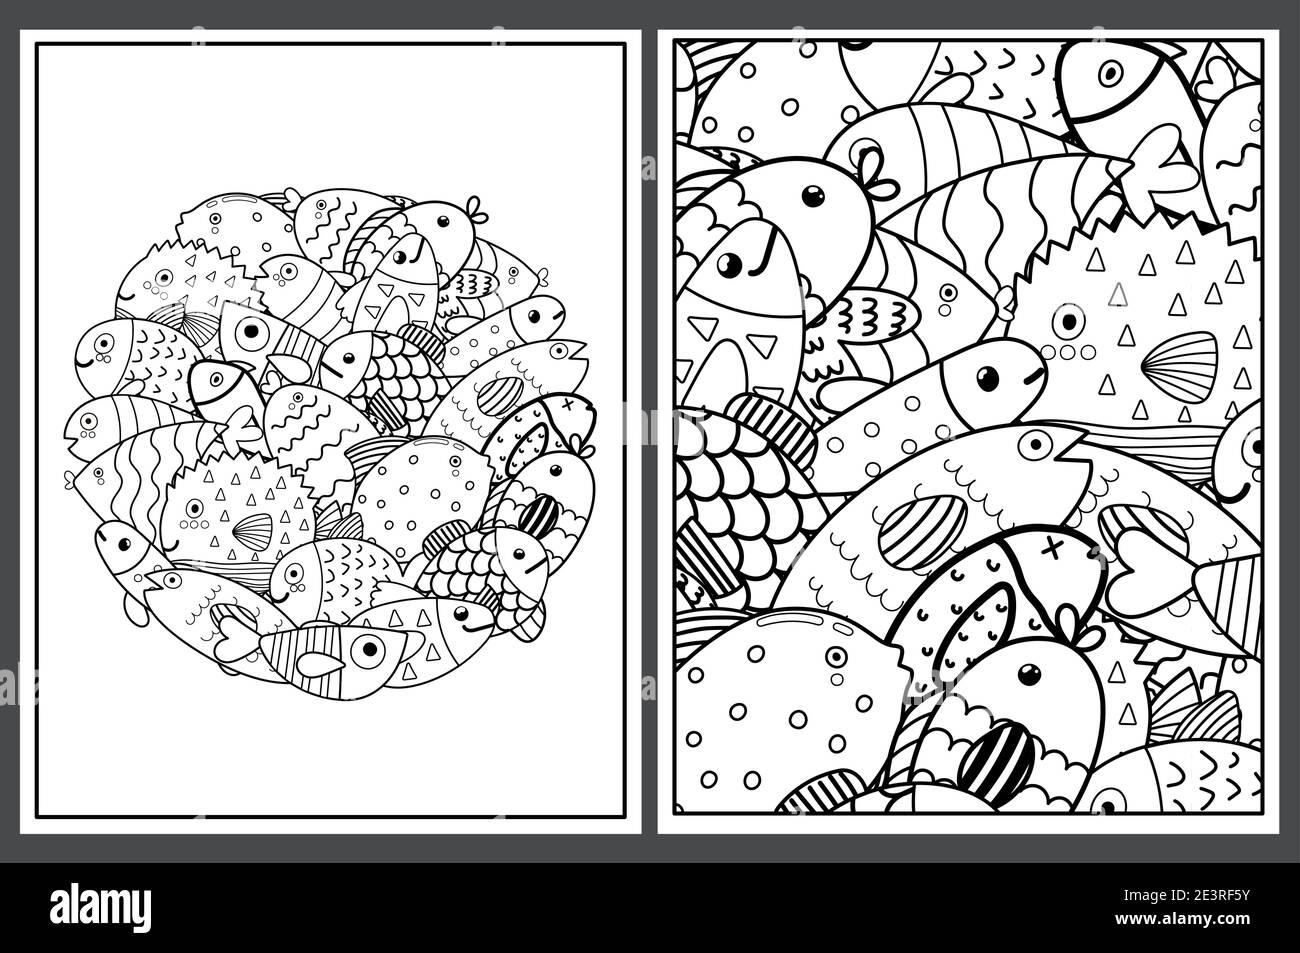 Coloring pages set with cute fish. Doodle sea animals templates ...